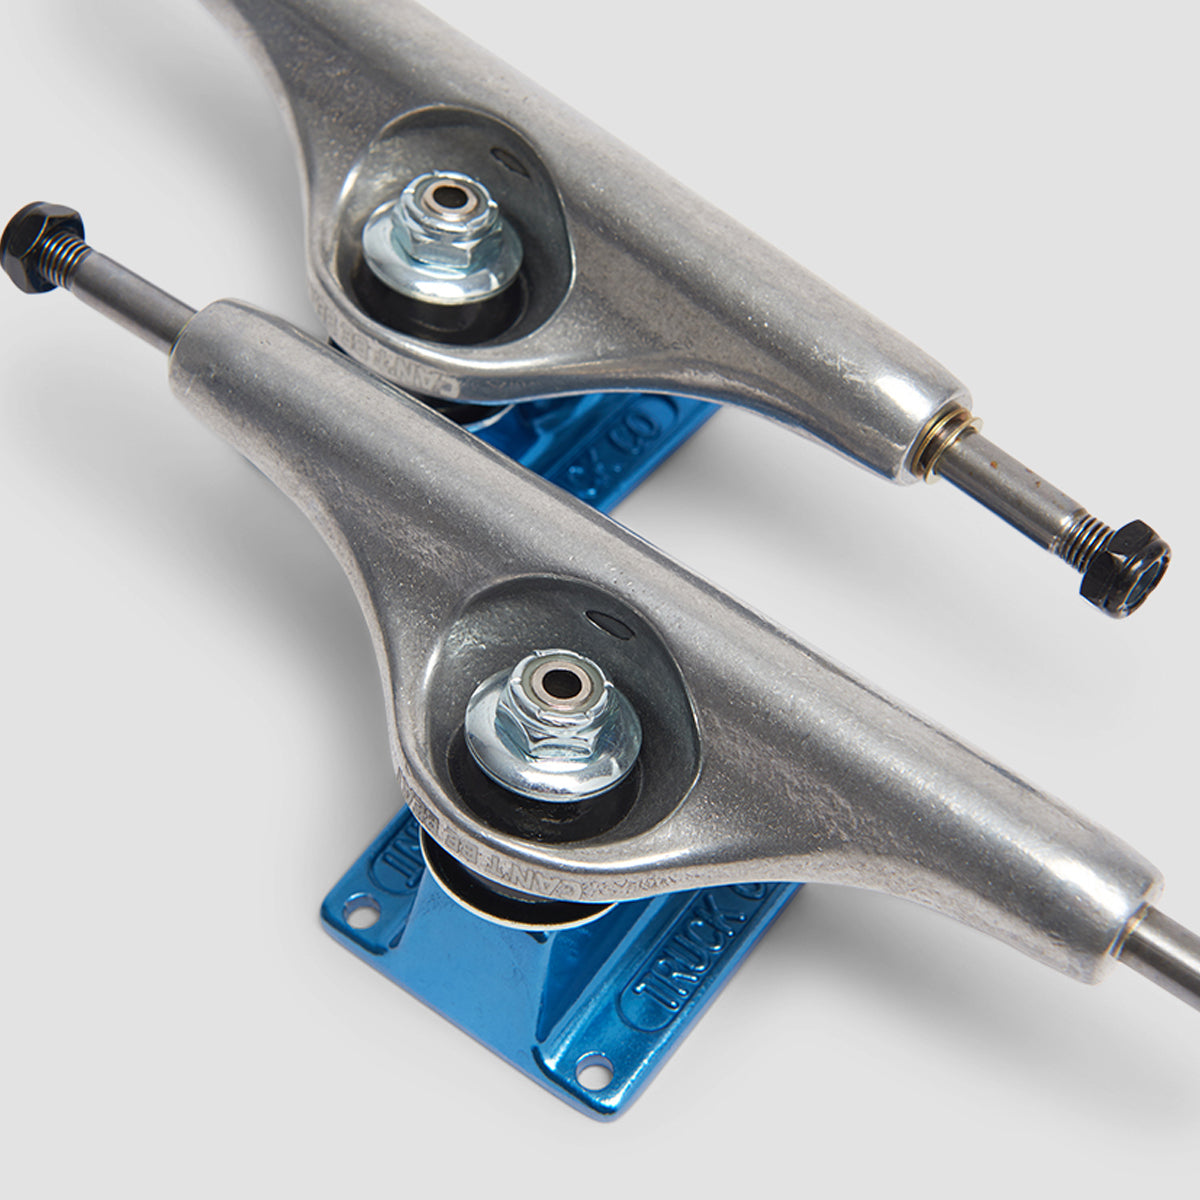 Independent Stage 11 159 Forged Hollow Cant Be Beat 78 Skateboard Trucks 1 Pair Silver/Blue - 8.75"